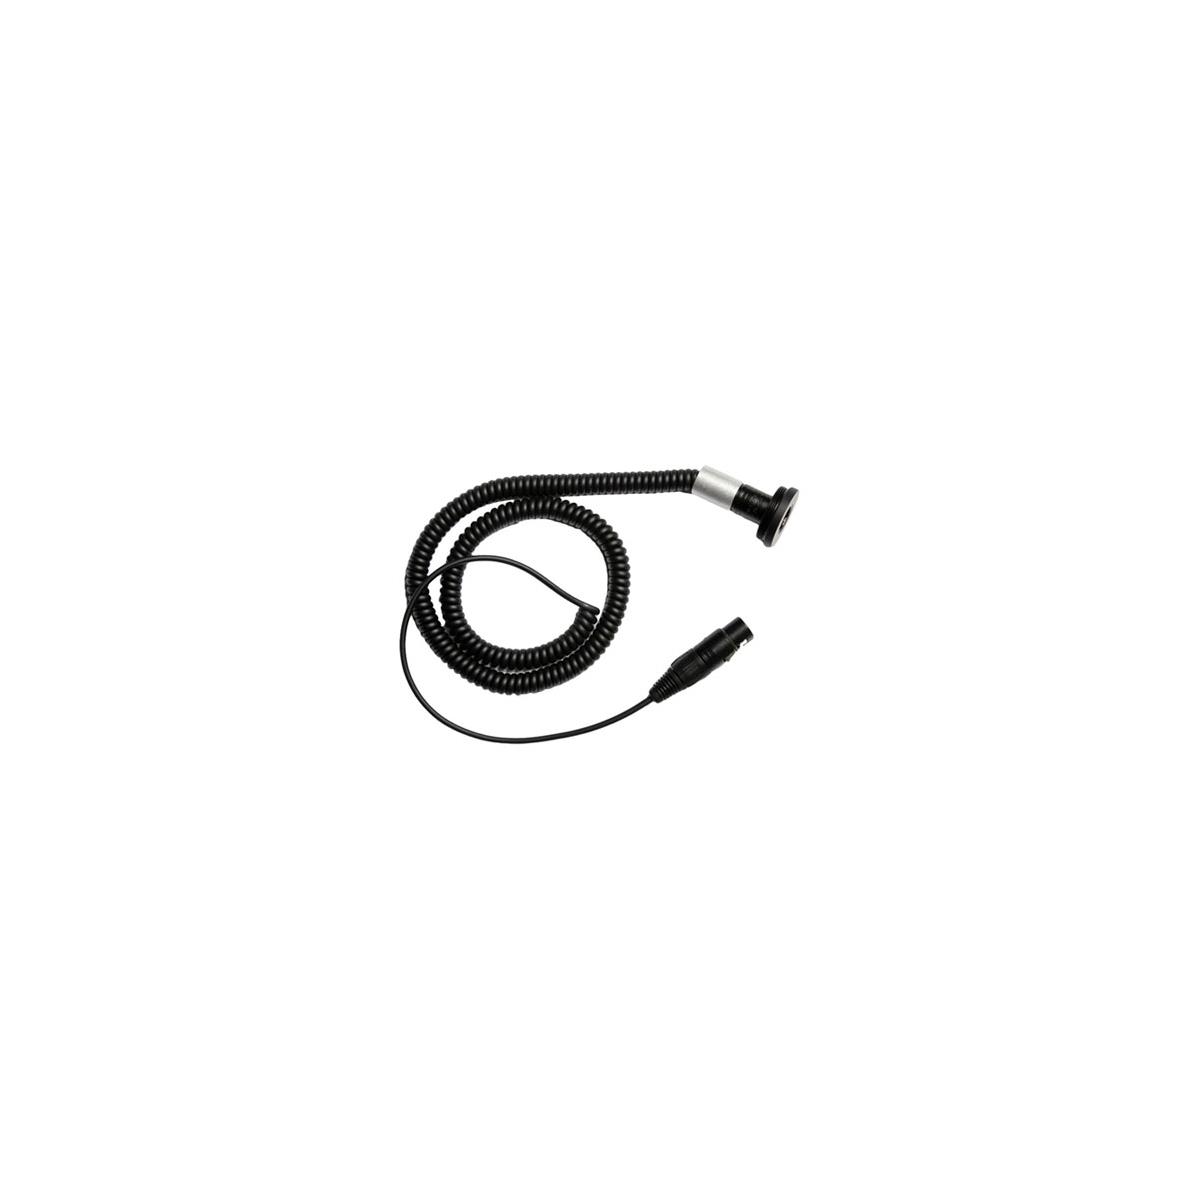 Image of PSC Coil Cable Kit for Medium Boom Pole